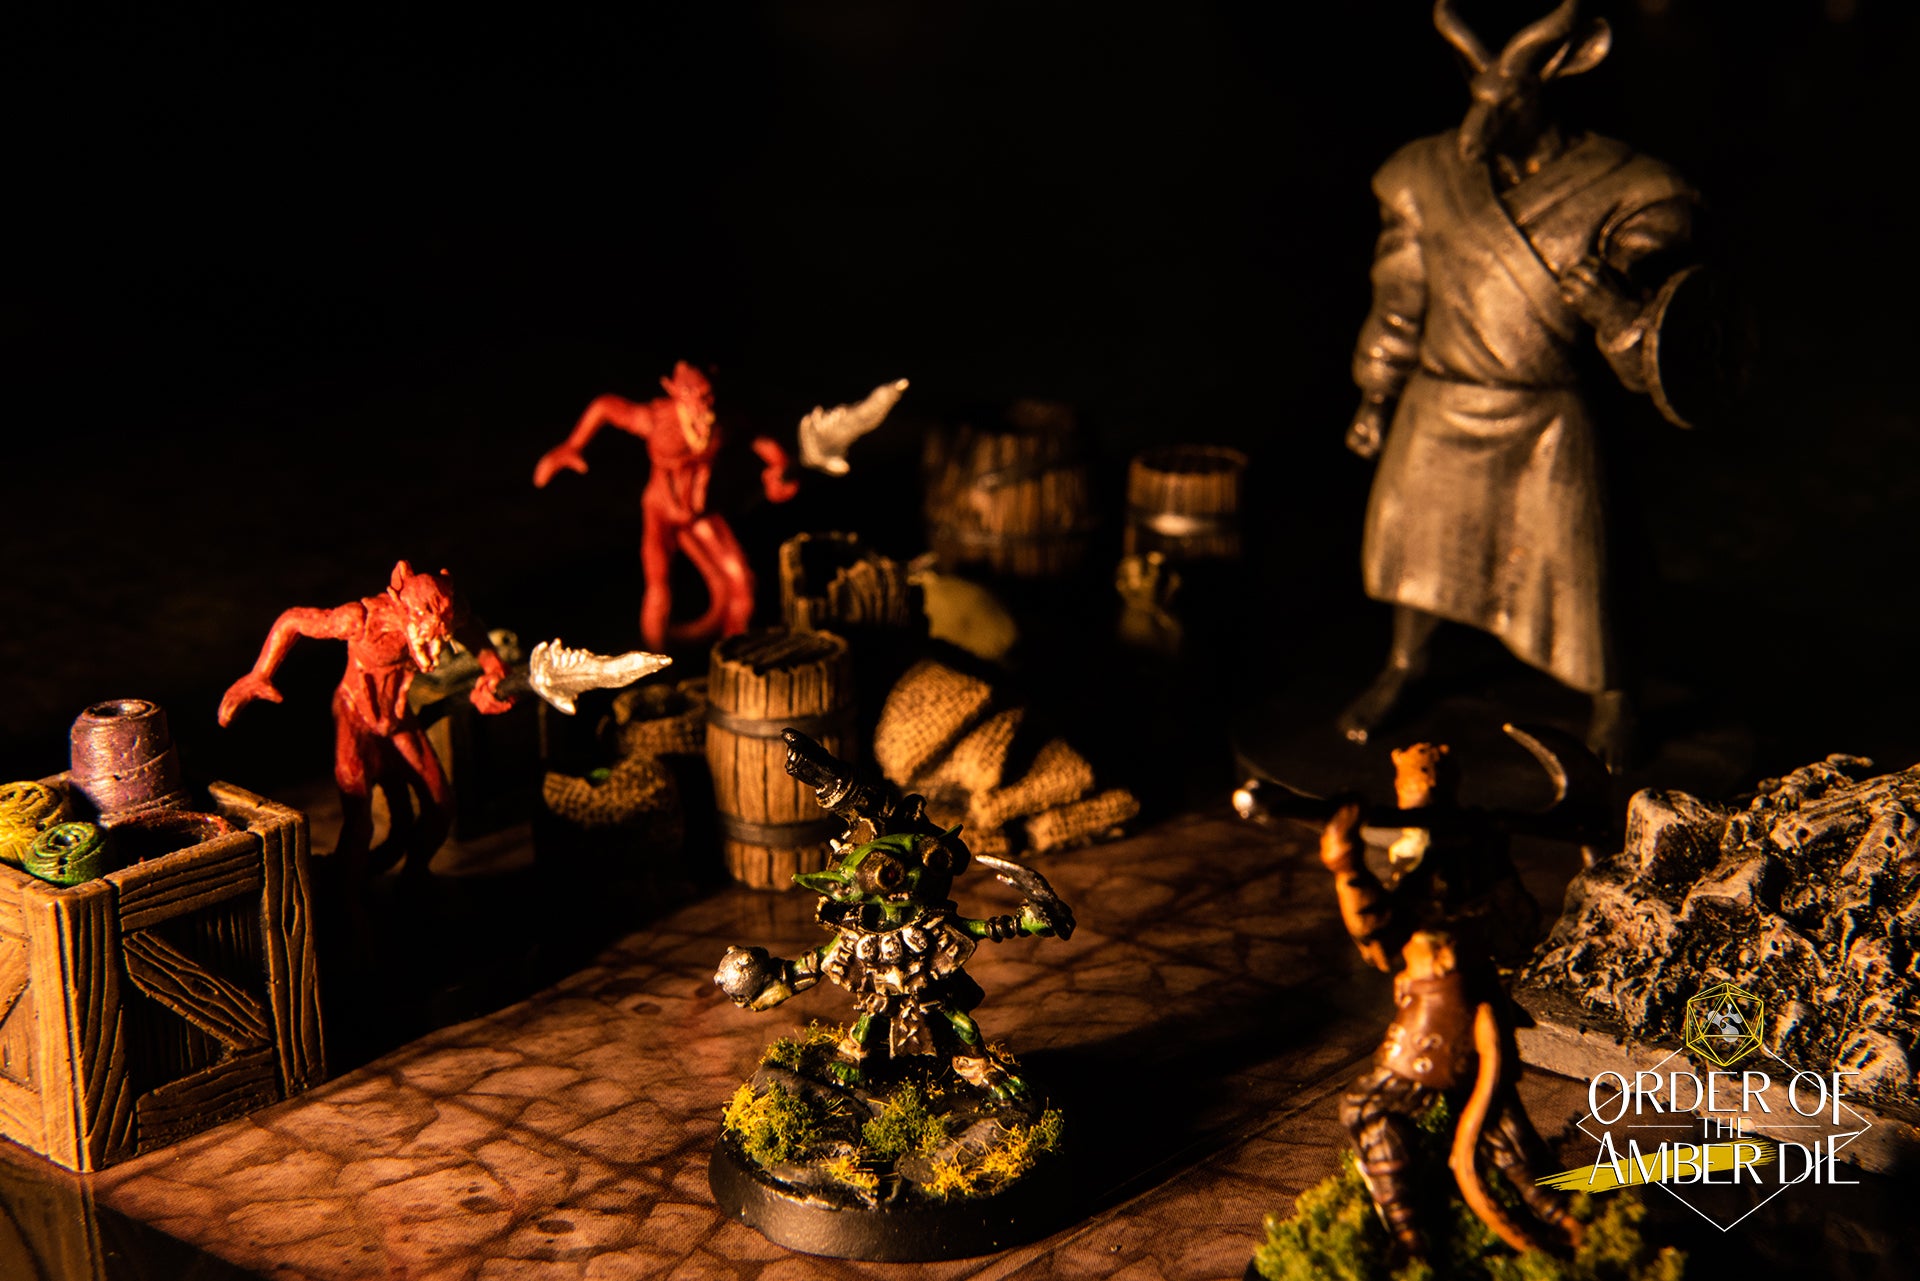 The Order of the Amber Die's mini figures in a dimly lit setting